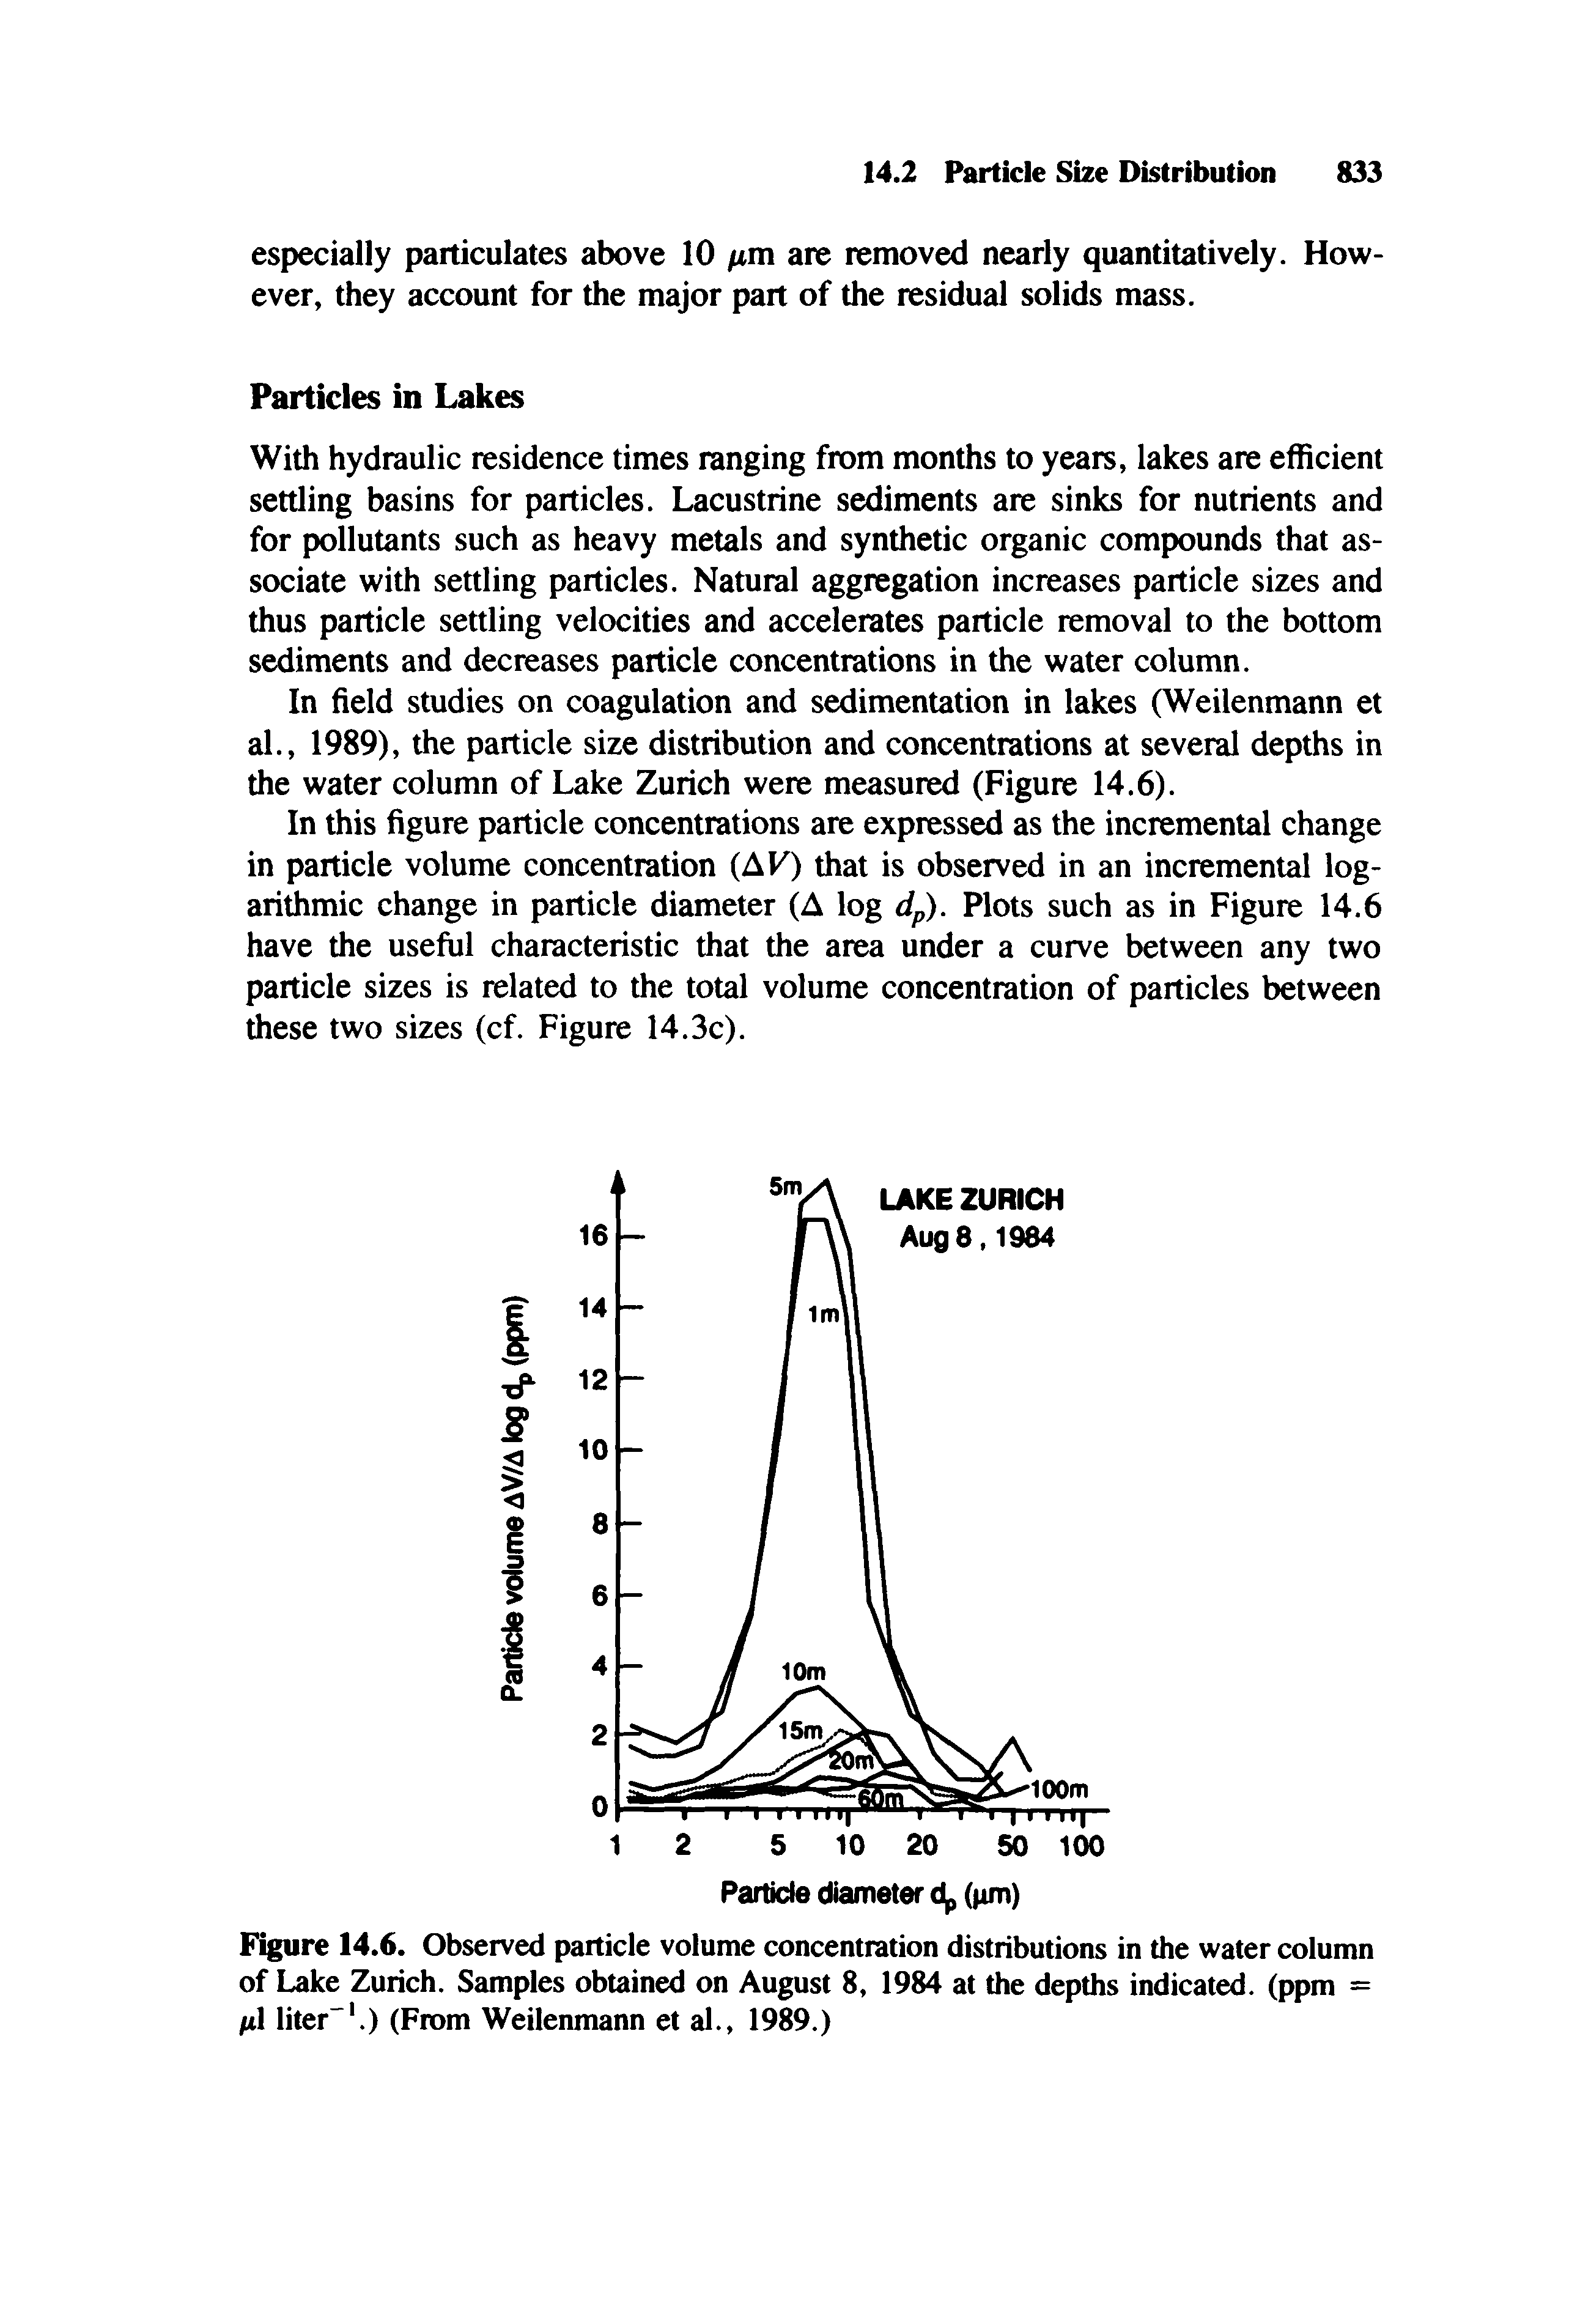 Figure 14.6. Observed particle volume concentration distributions in the water column of Lake Zurich. Samples obtained on August 8, 1984 at the depths indicated, (ppm = III liter". ) (From Weilenmann et al., 1989.)...